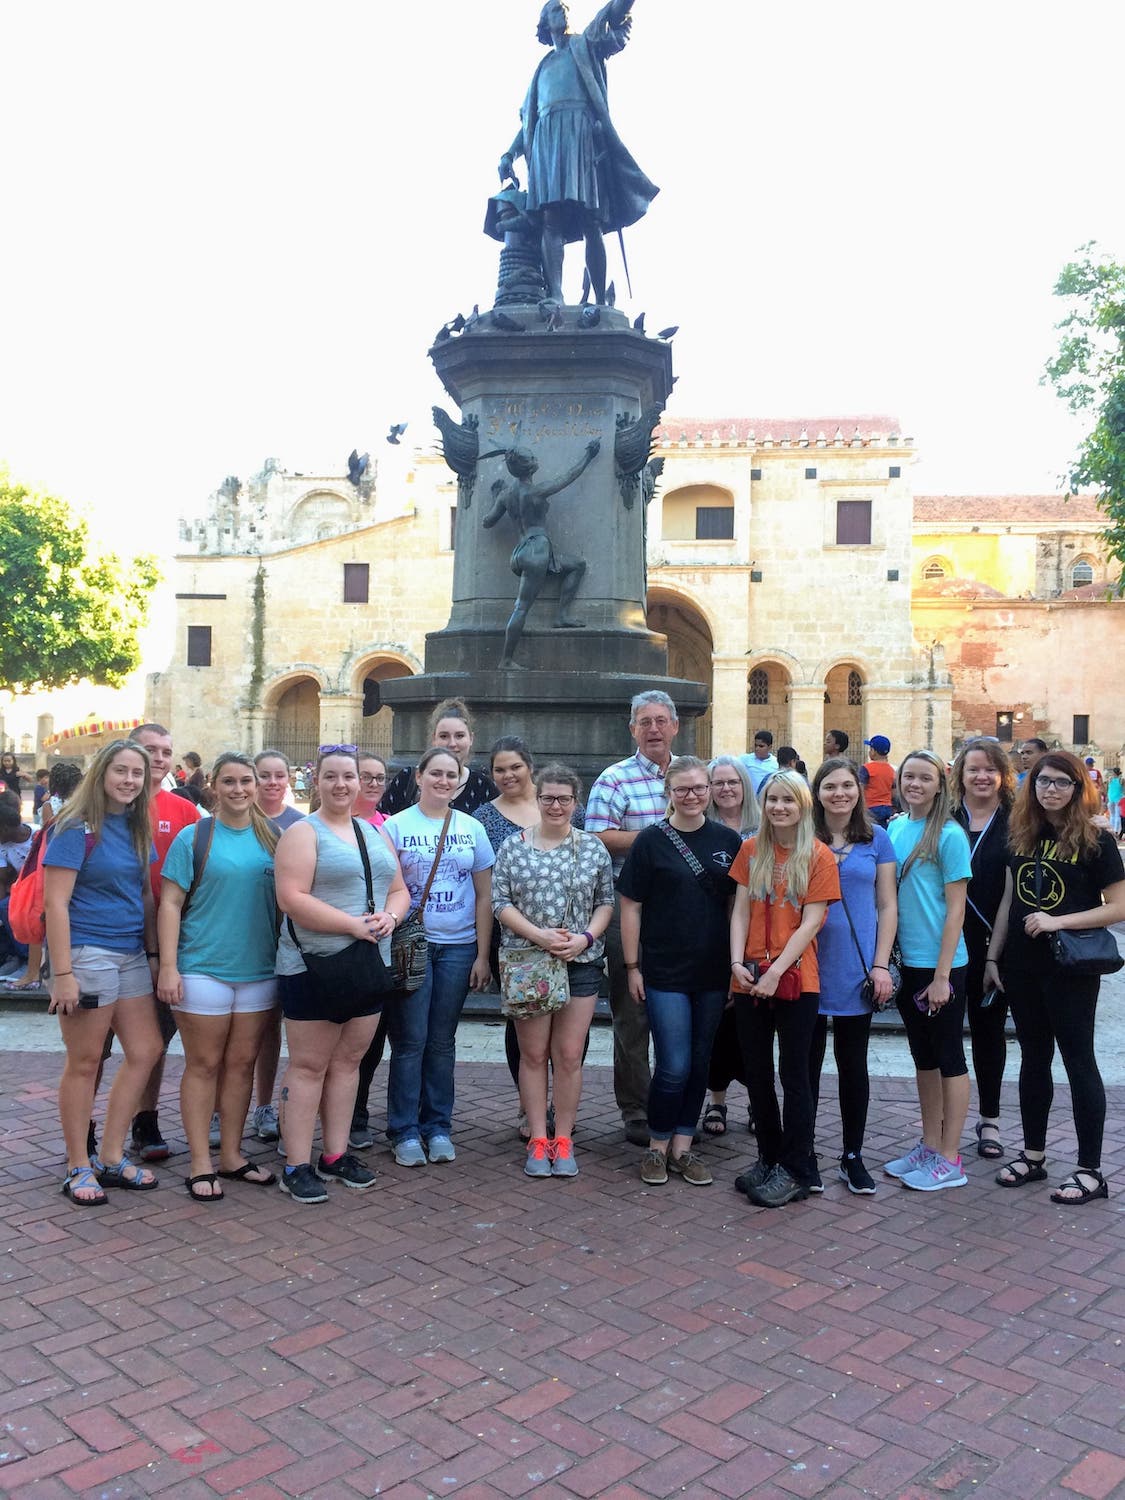 Group in front of statue.